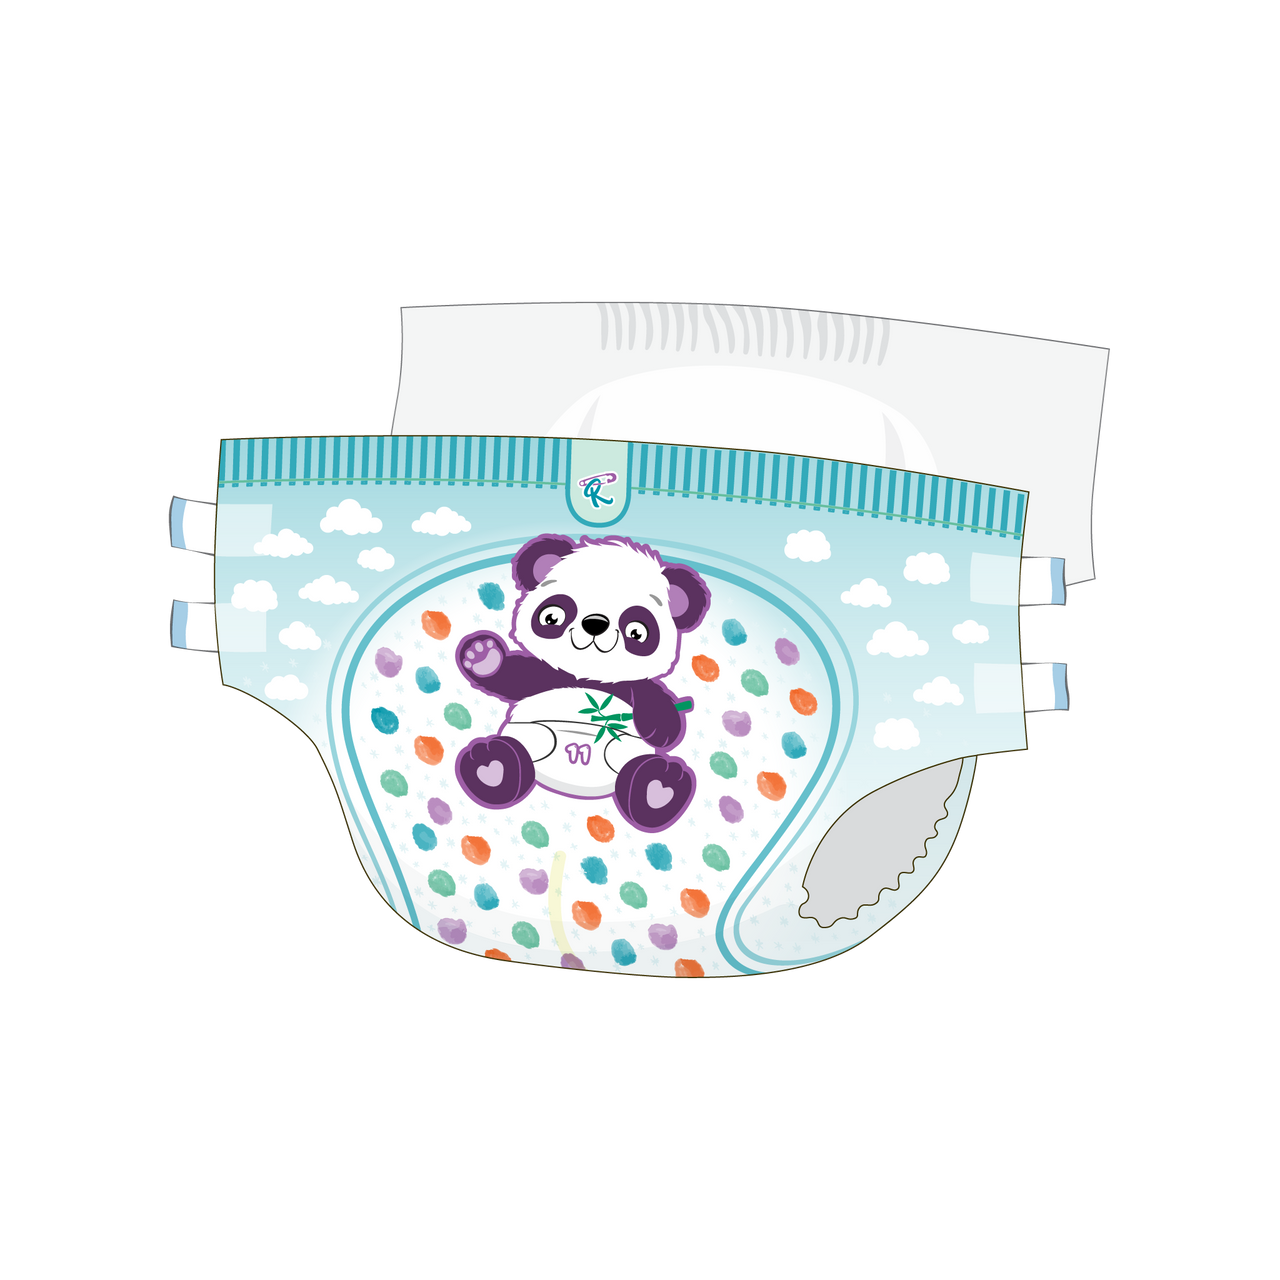  Rearz - Critter Caboose Brief Adult Printed Diapers